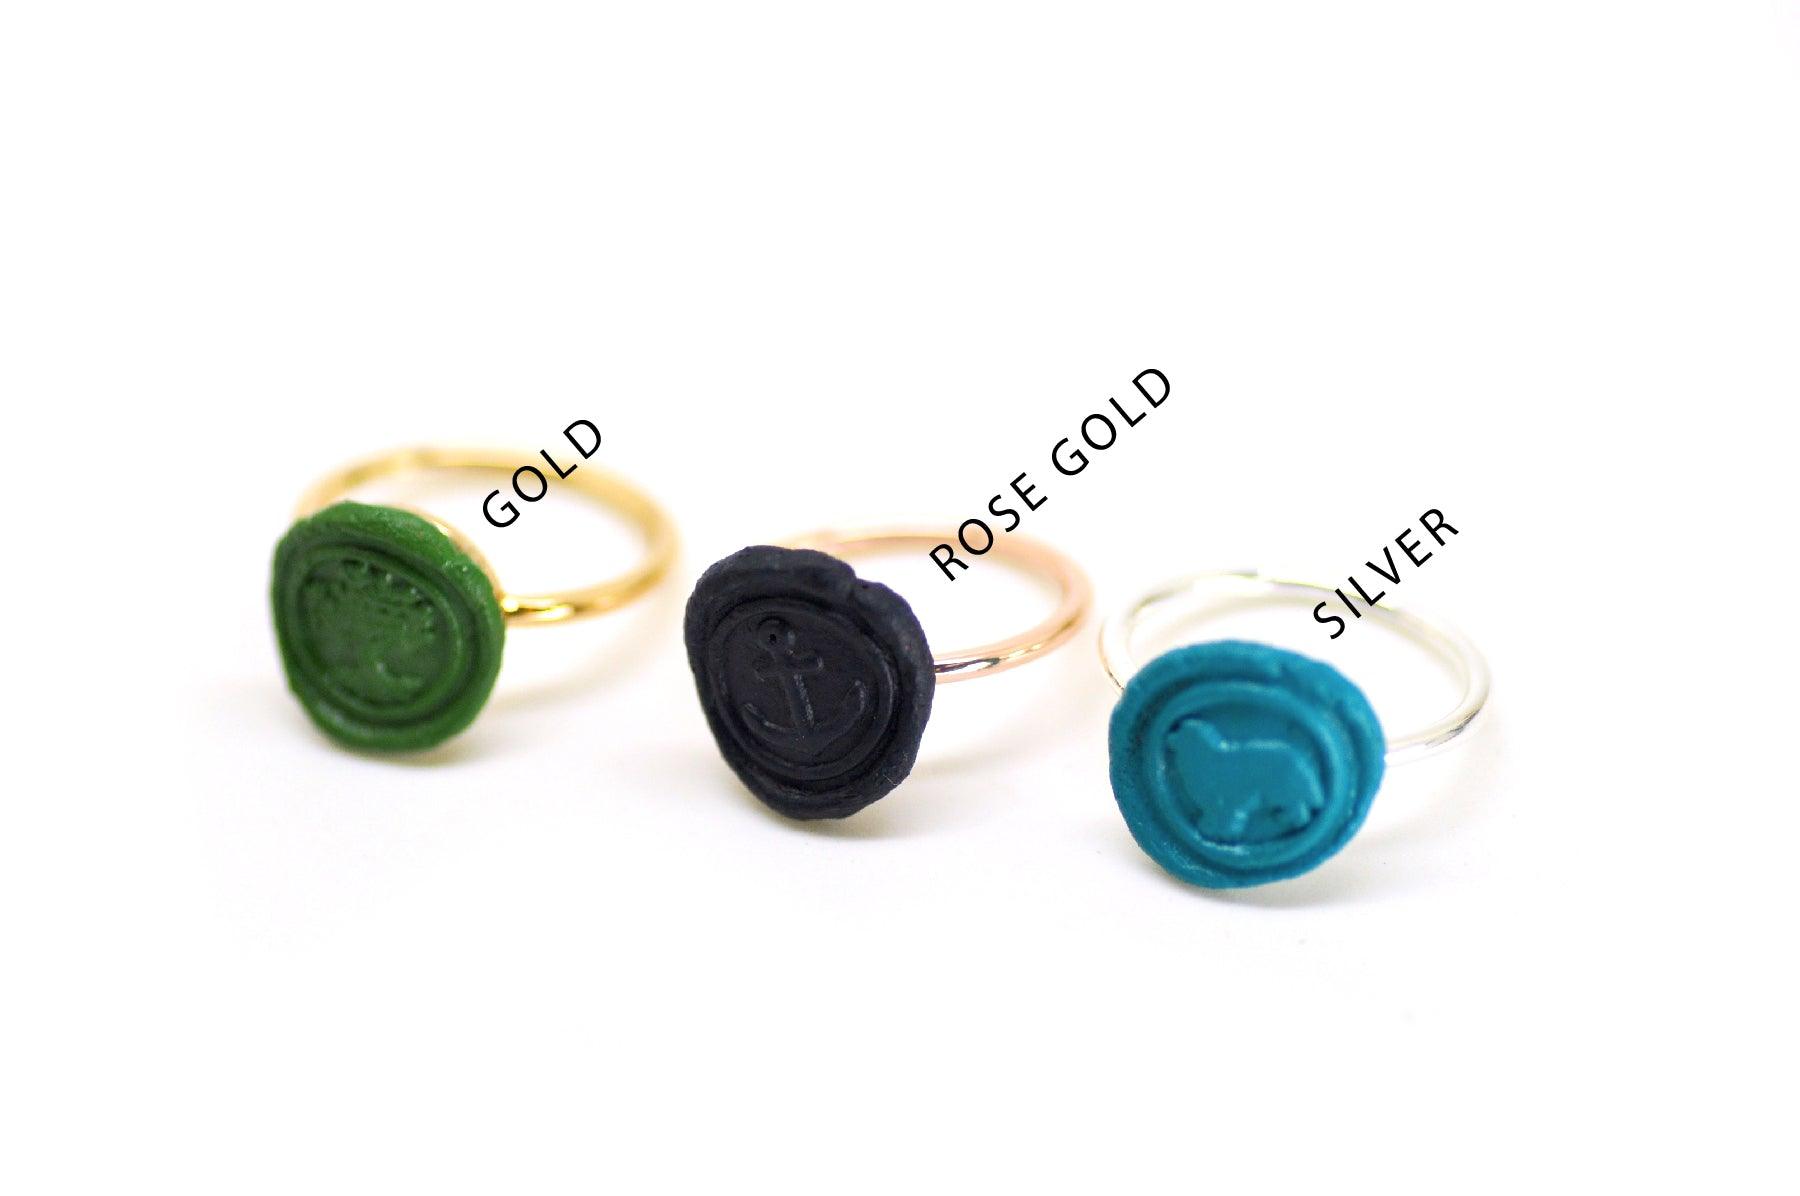 OOAK Leafy Initial Wax Seal Ring - Backtozero B20 - 1 initial, 1initial, Green, Handmade, Initial, Letter, olive, One Initial, OOAK, Personalized, ring, size 7